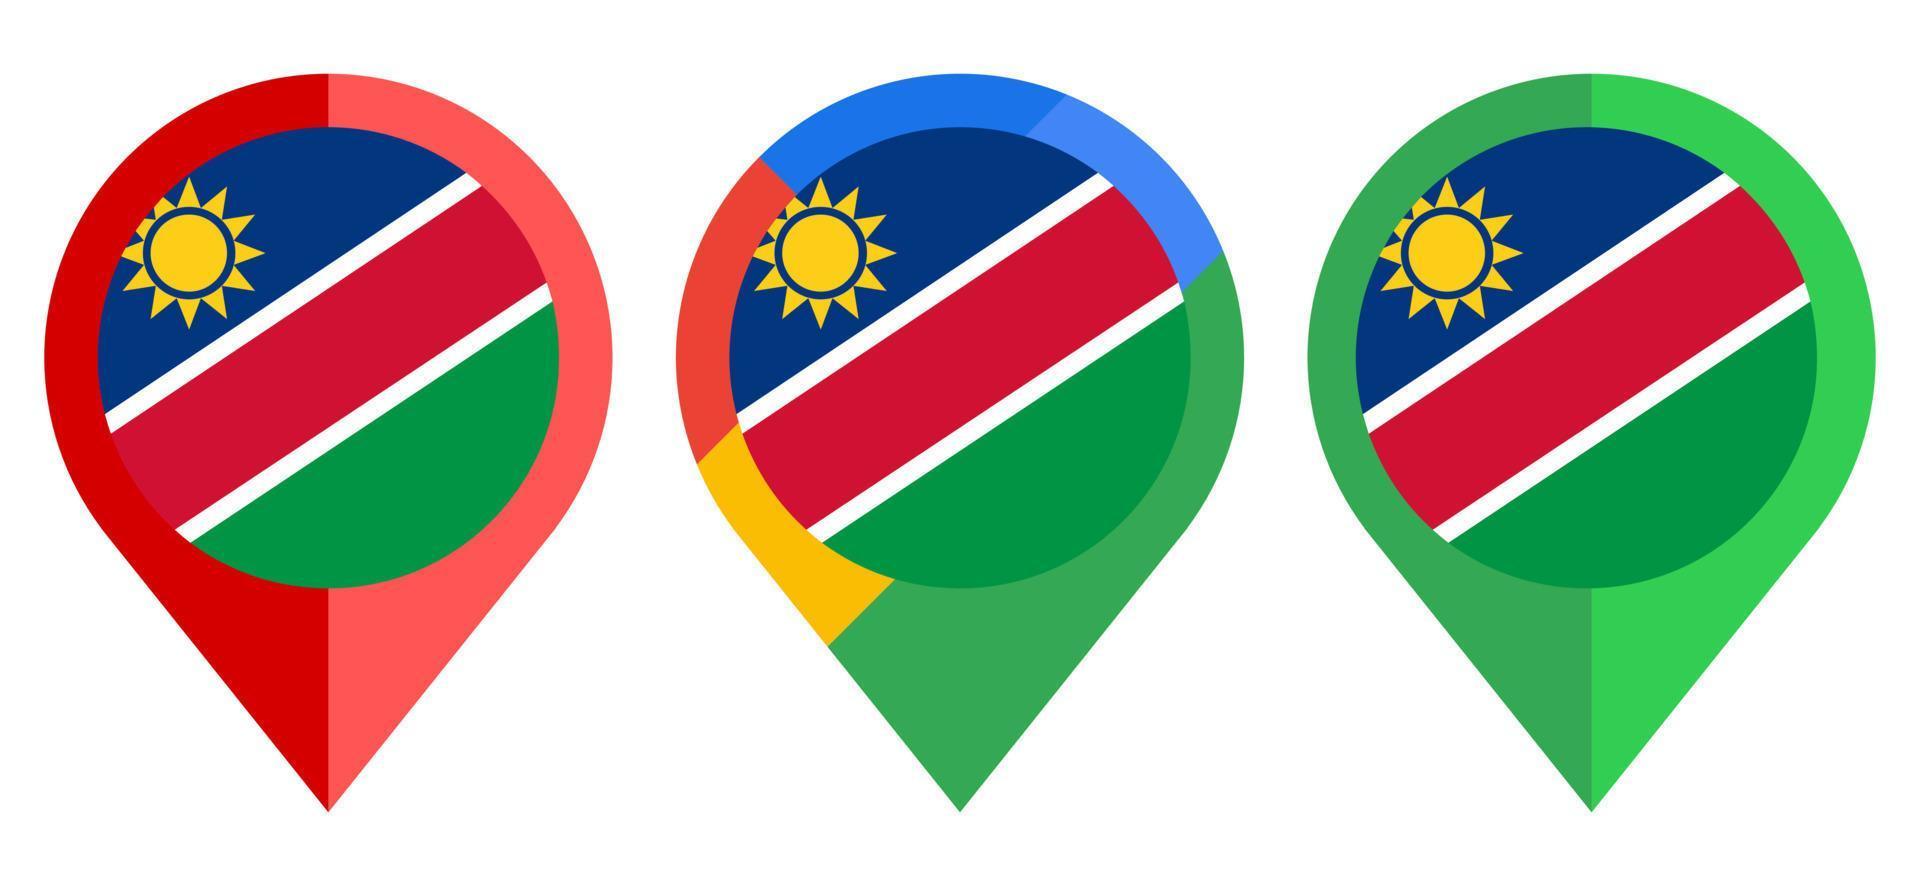 flat map marker icon with namibia flag isolated on white background vector